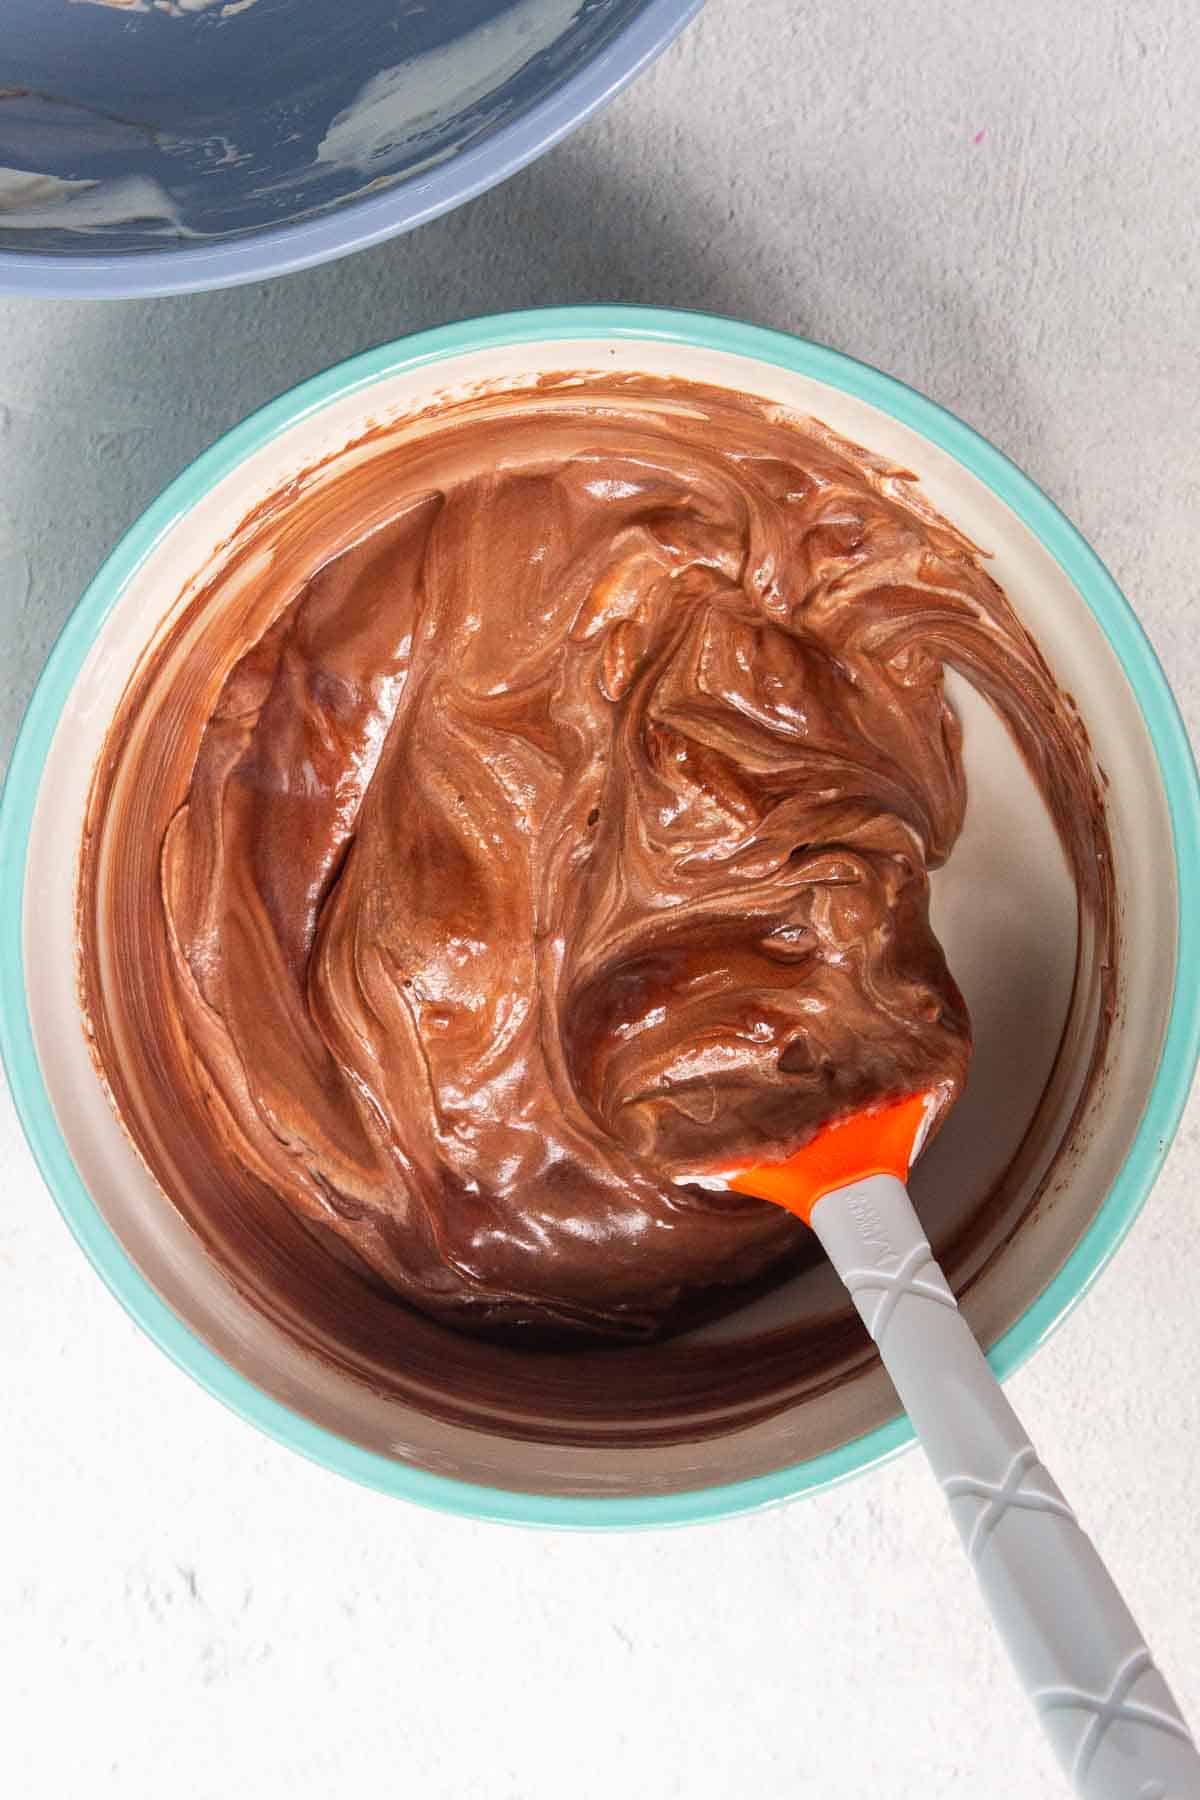 The chocolate mousse mixture is mostly combined with some faint streaks of cream remaining